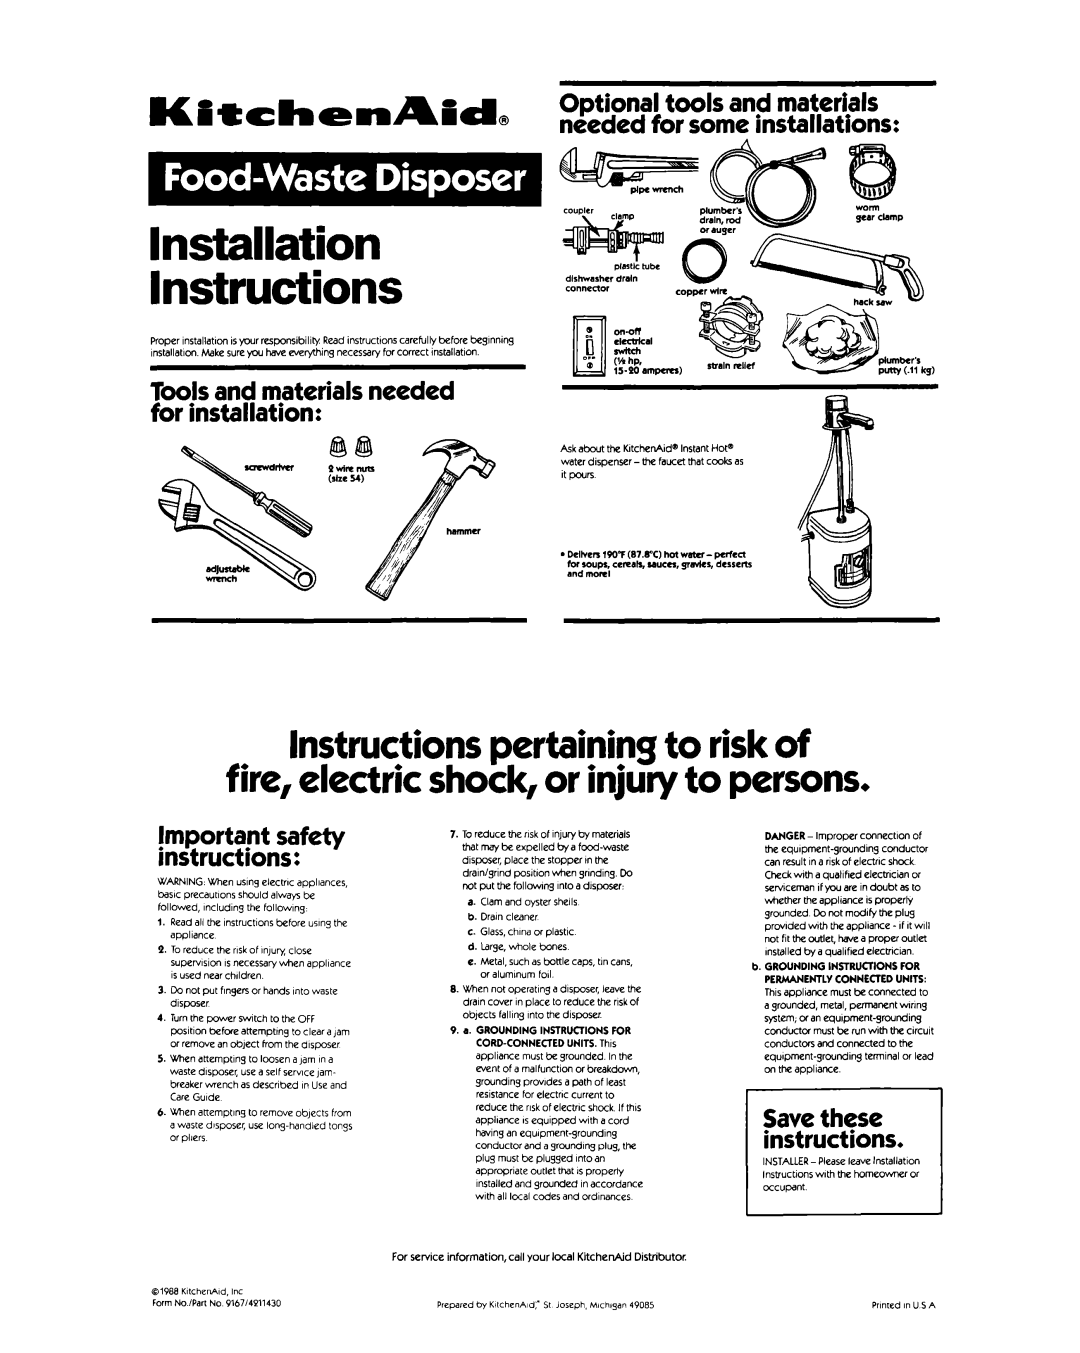 KitchenAid Garbage Disposal installation instructions Tools and materials needed for installation, Save these instructions 